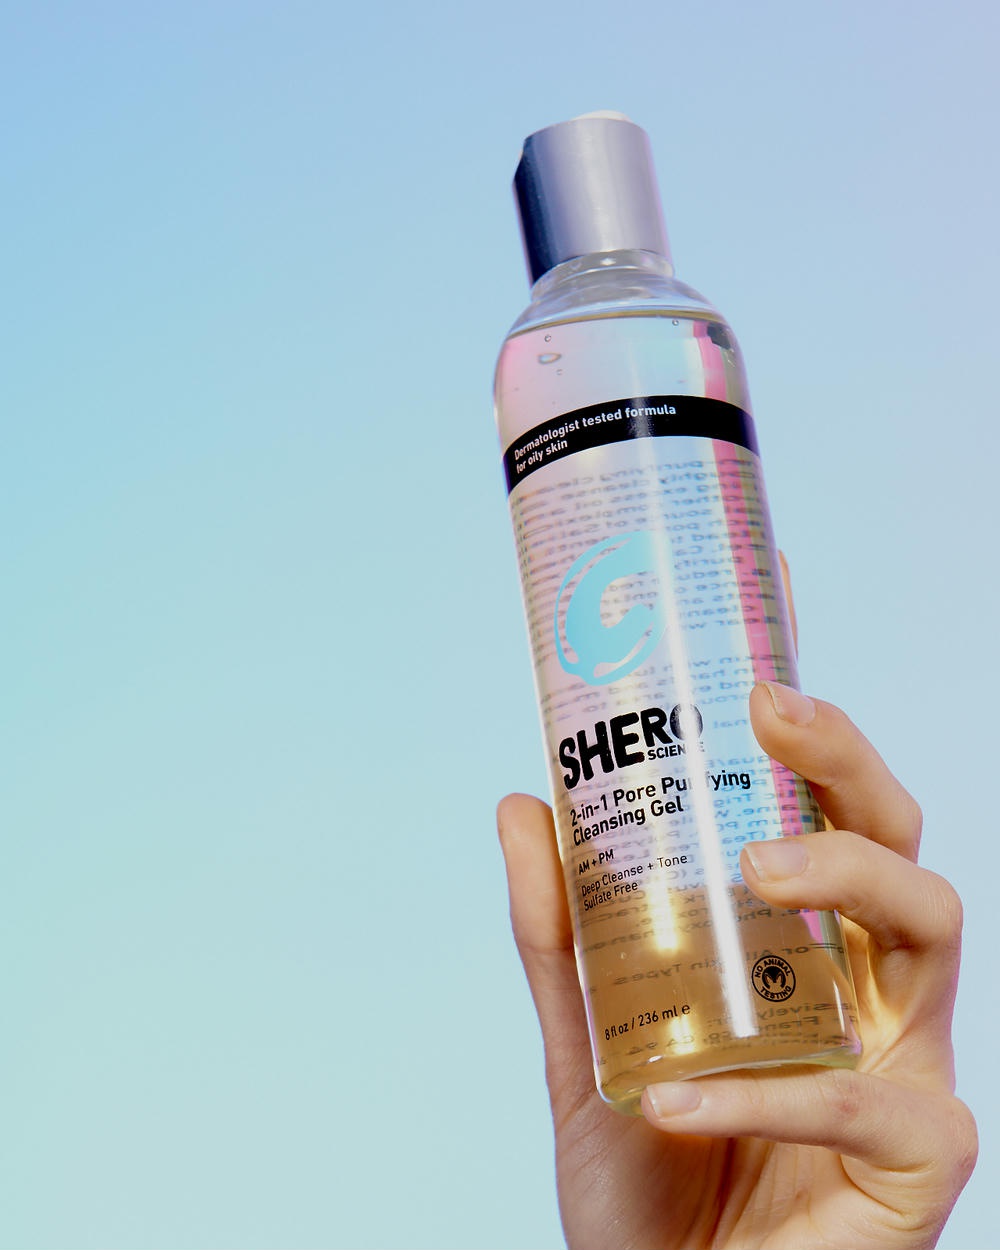 Shero Science 2-In-1 Pore Purifying Cleansing Gel